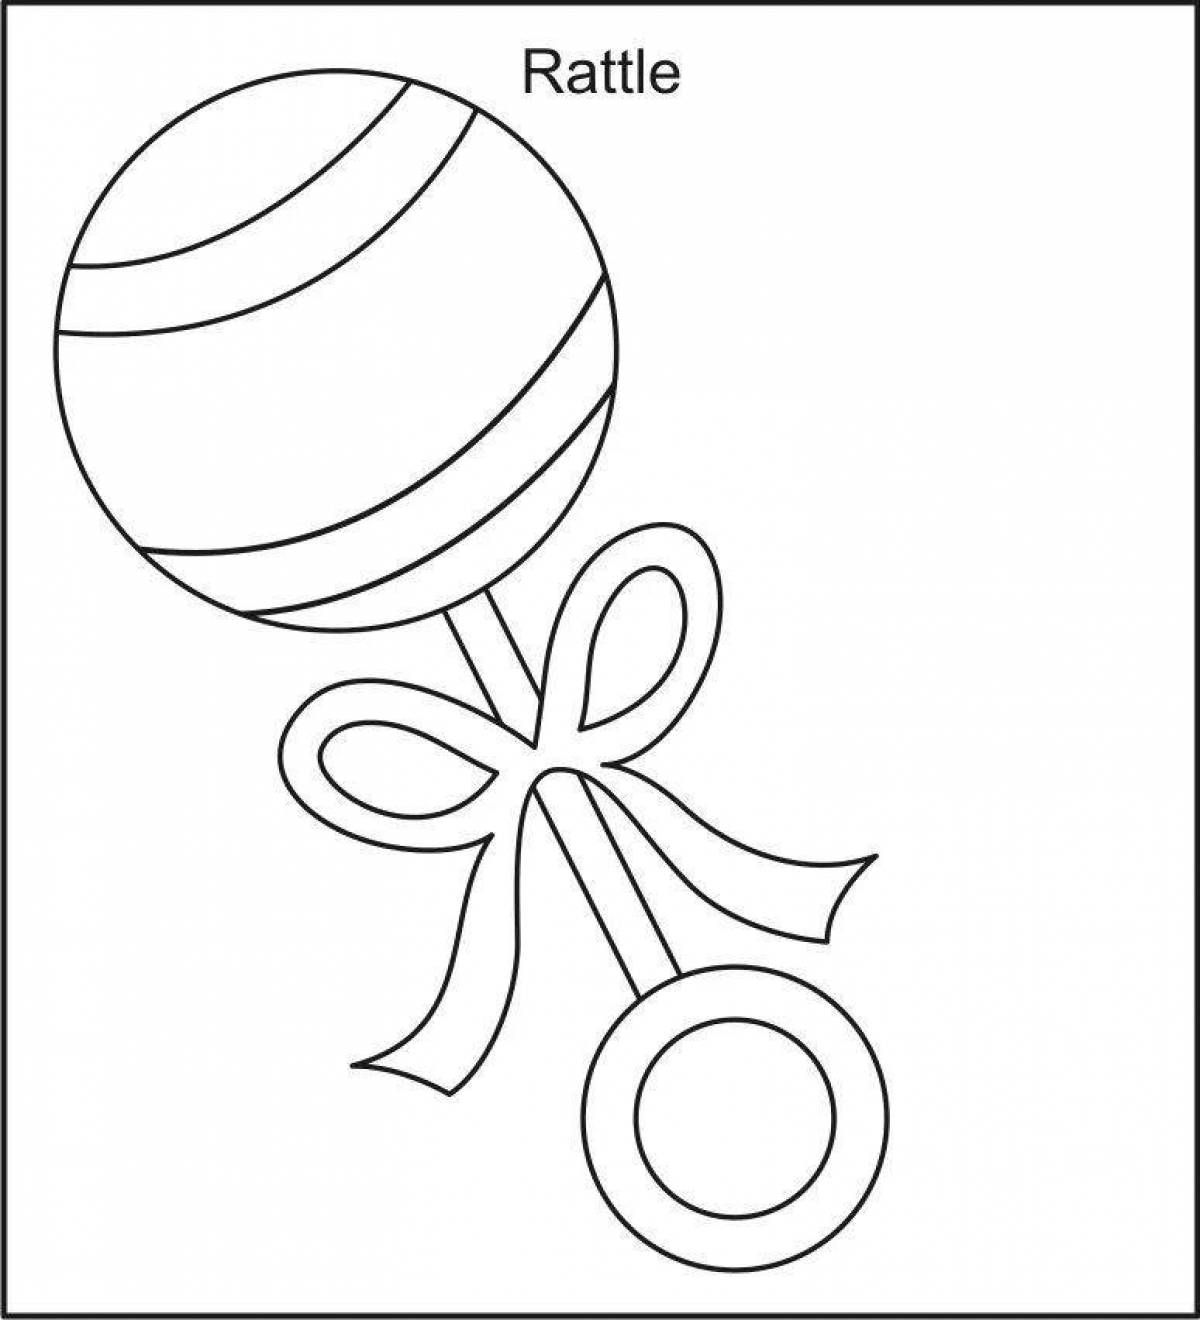 Luminous rattle coloring page